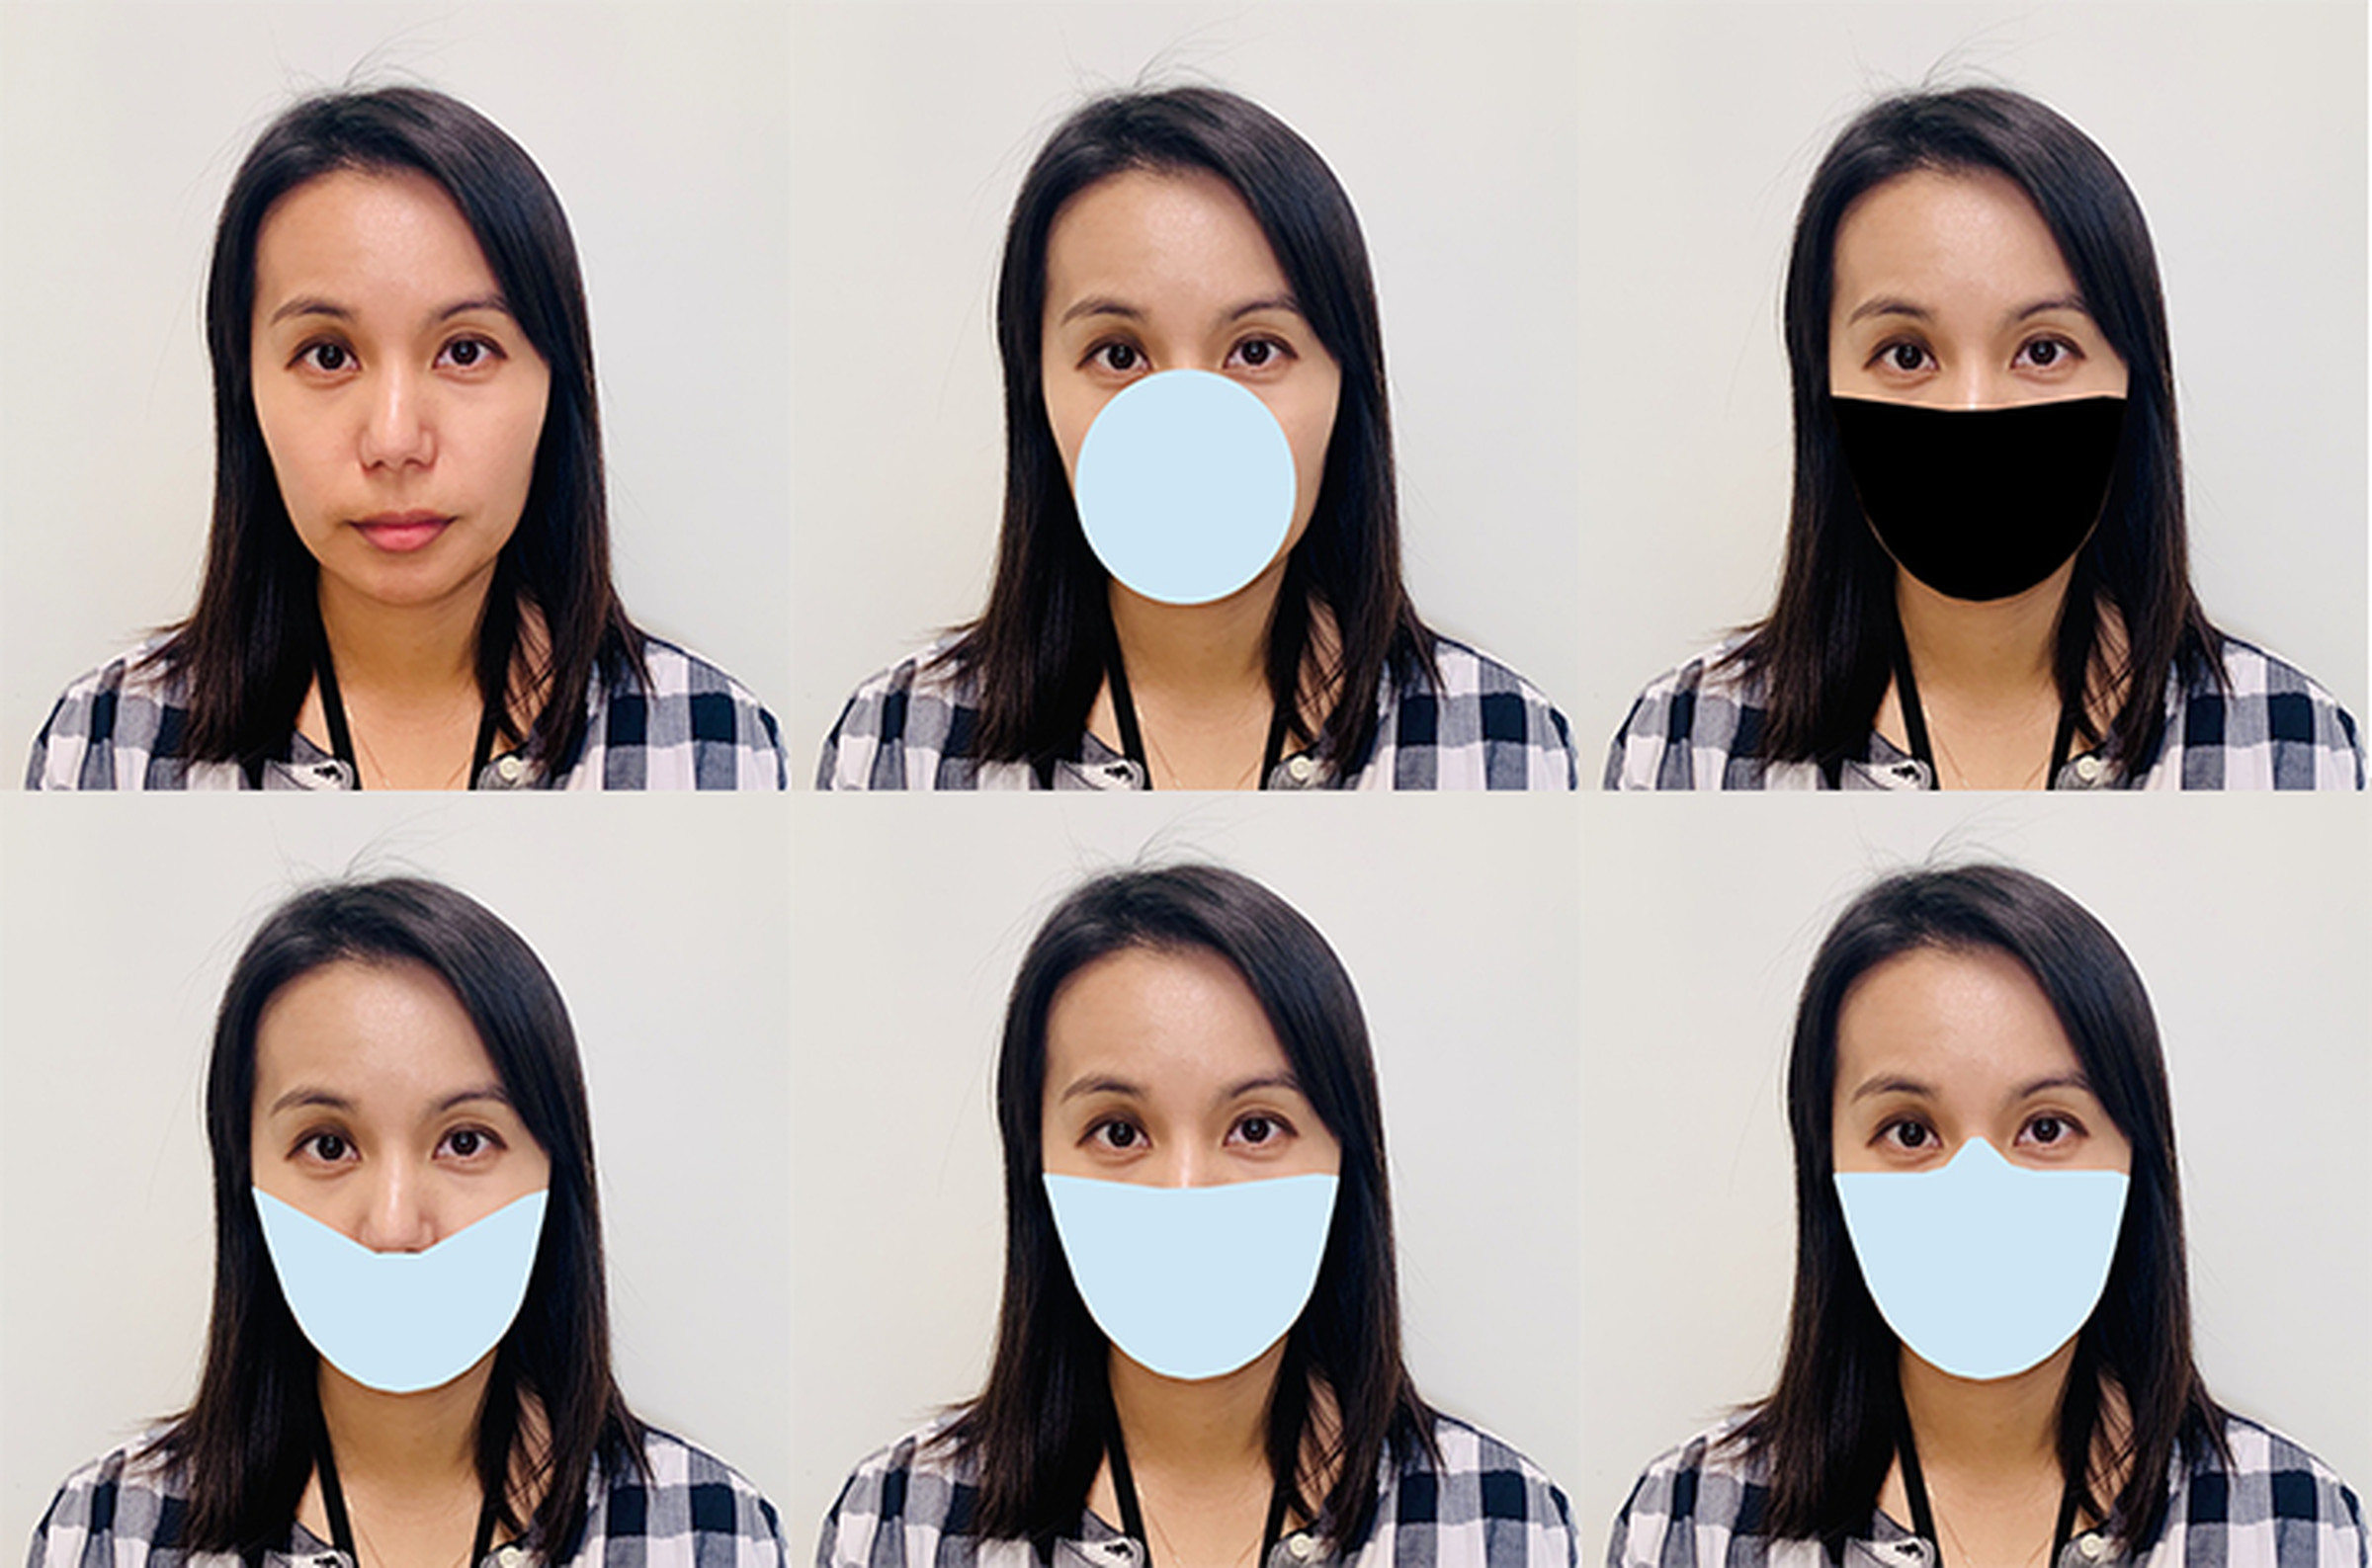 Example images used by NIST to assess the accuracy of various facial recognition algorithms. 